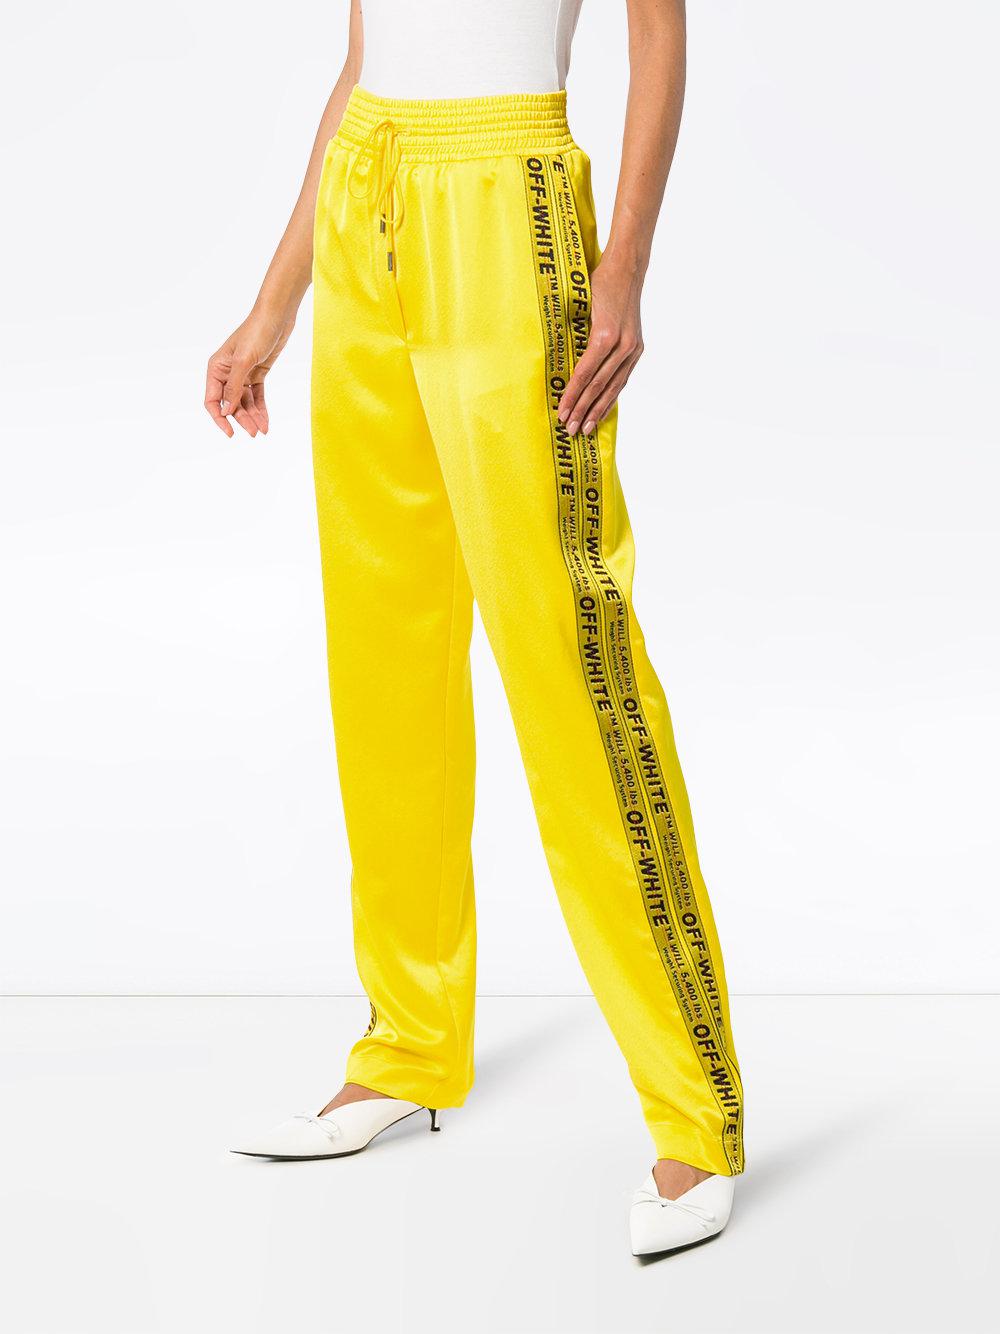 Off-White c/o Virgil Abloh Synthetic Industrial Logo Striped Track Pants in  Yellow & Orange (Yellow) - Lyst